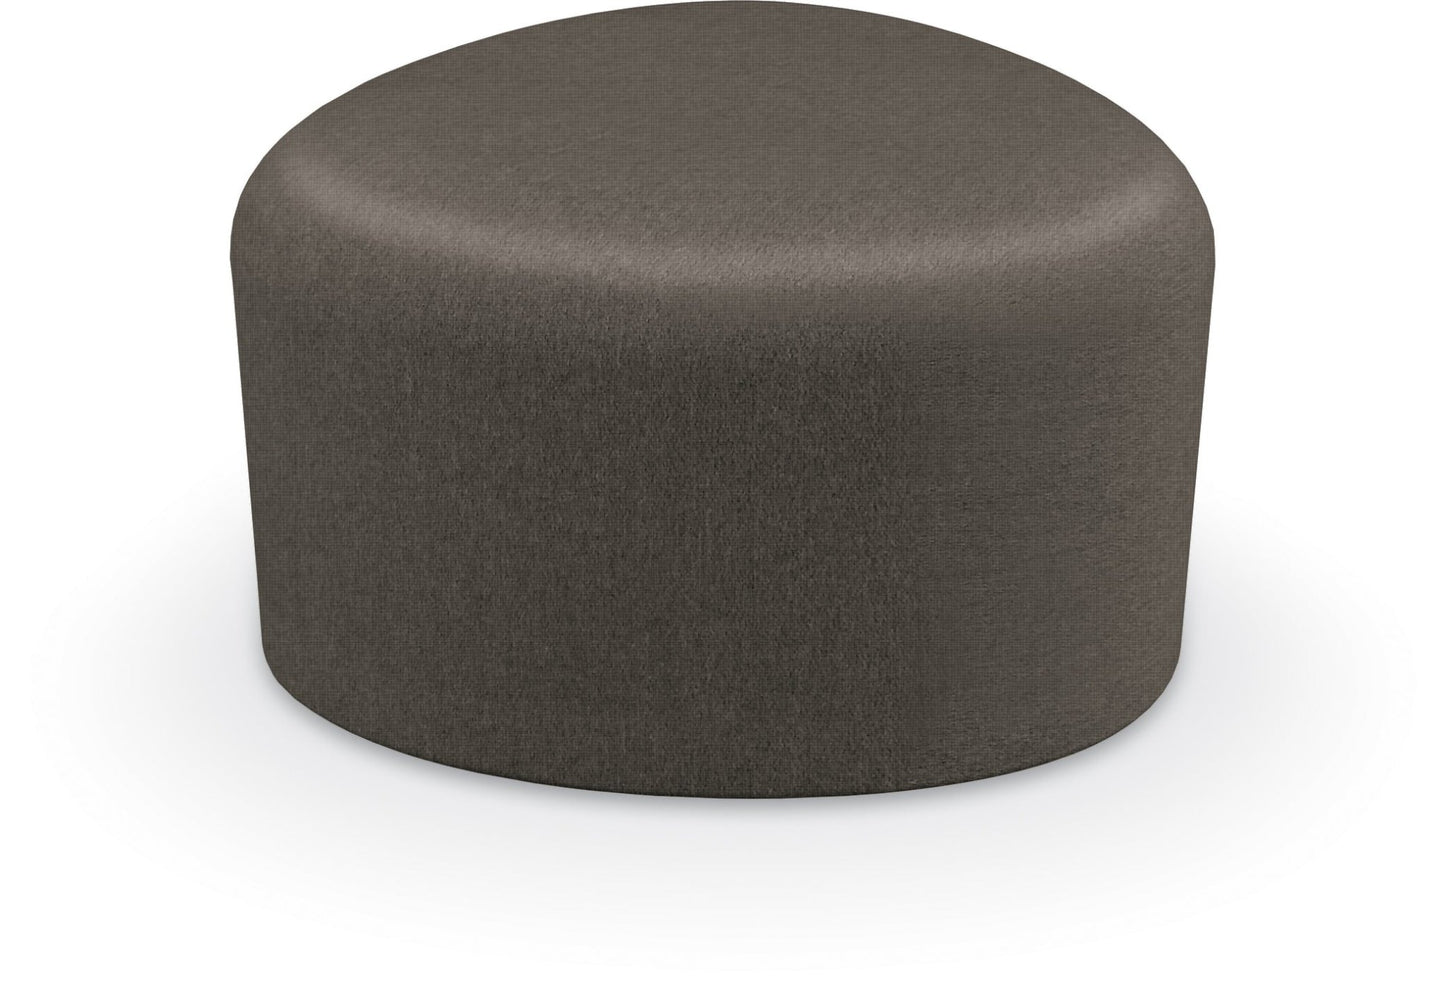 Mooreco Akt Soft Seating Lounge Small Ottoman - Grade 02 Fabric and Powder Coated Sled Legs - SchoolOutlet